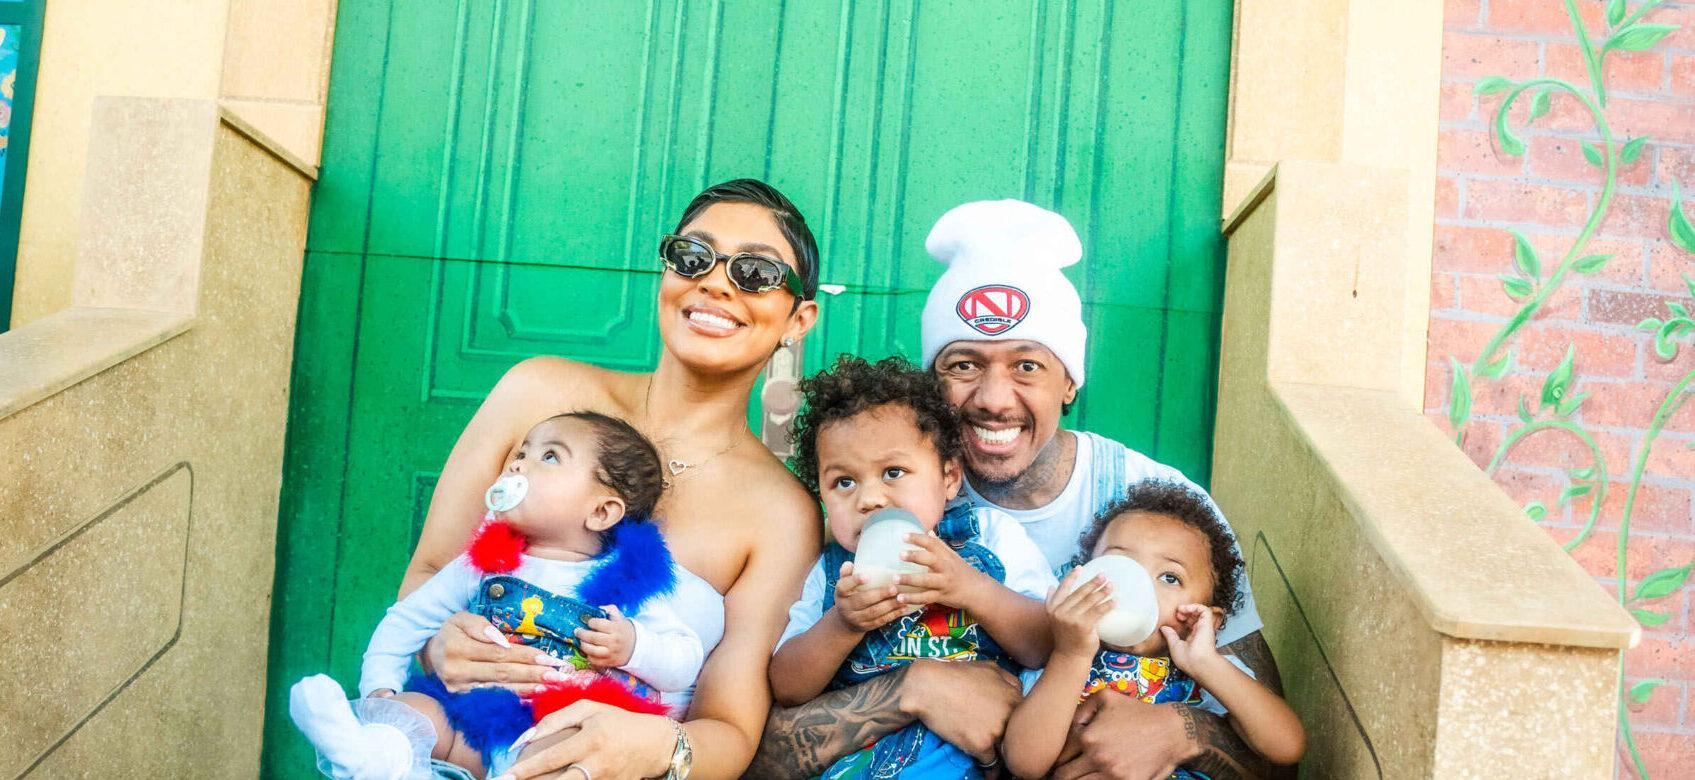 Abby De La Rosa Admits There Are ‘Challenges’ Working With Baby Daddy Nick Cannon